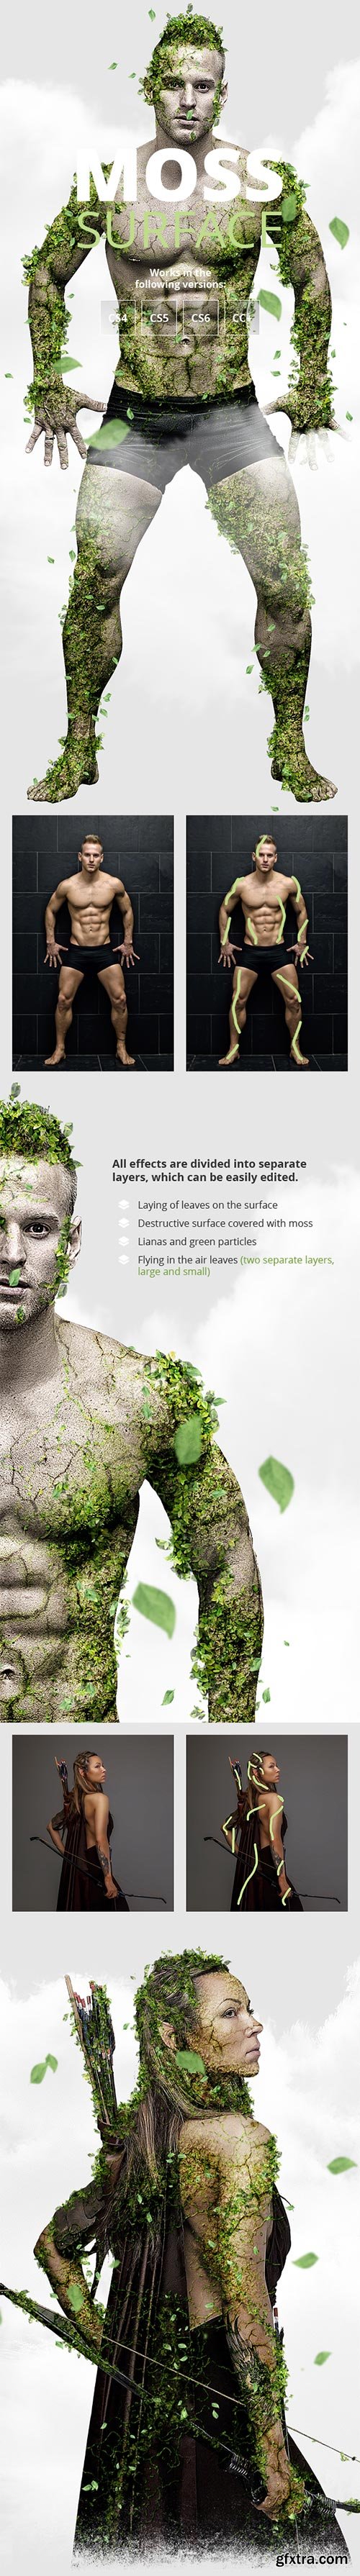 GraphicRiver - Moss Photoshop Action 20226781